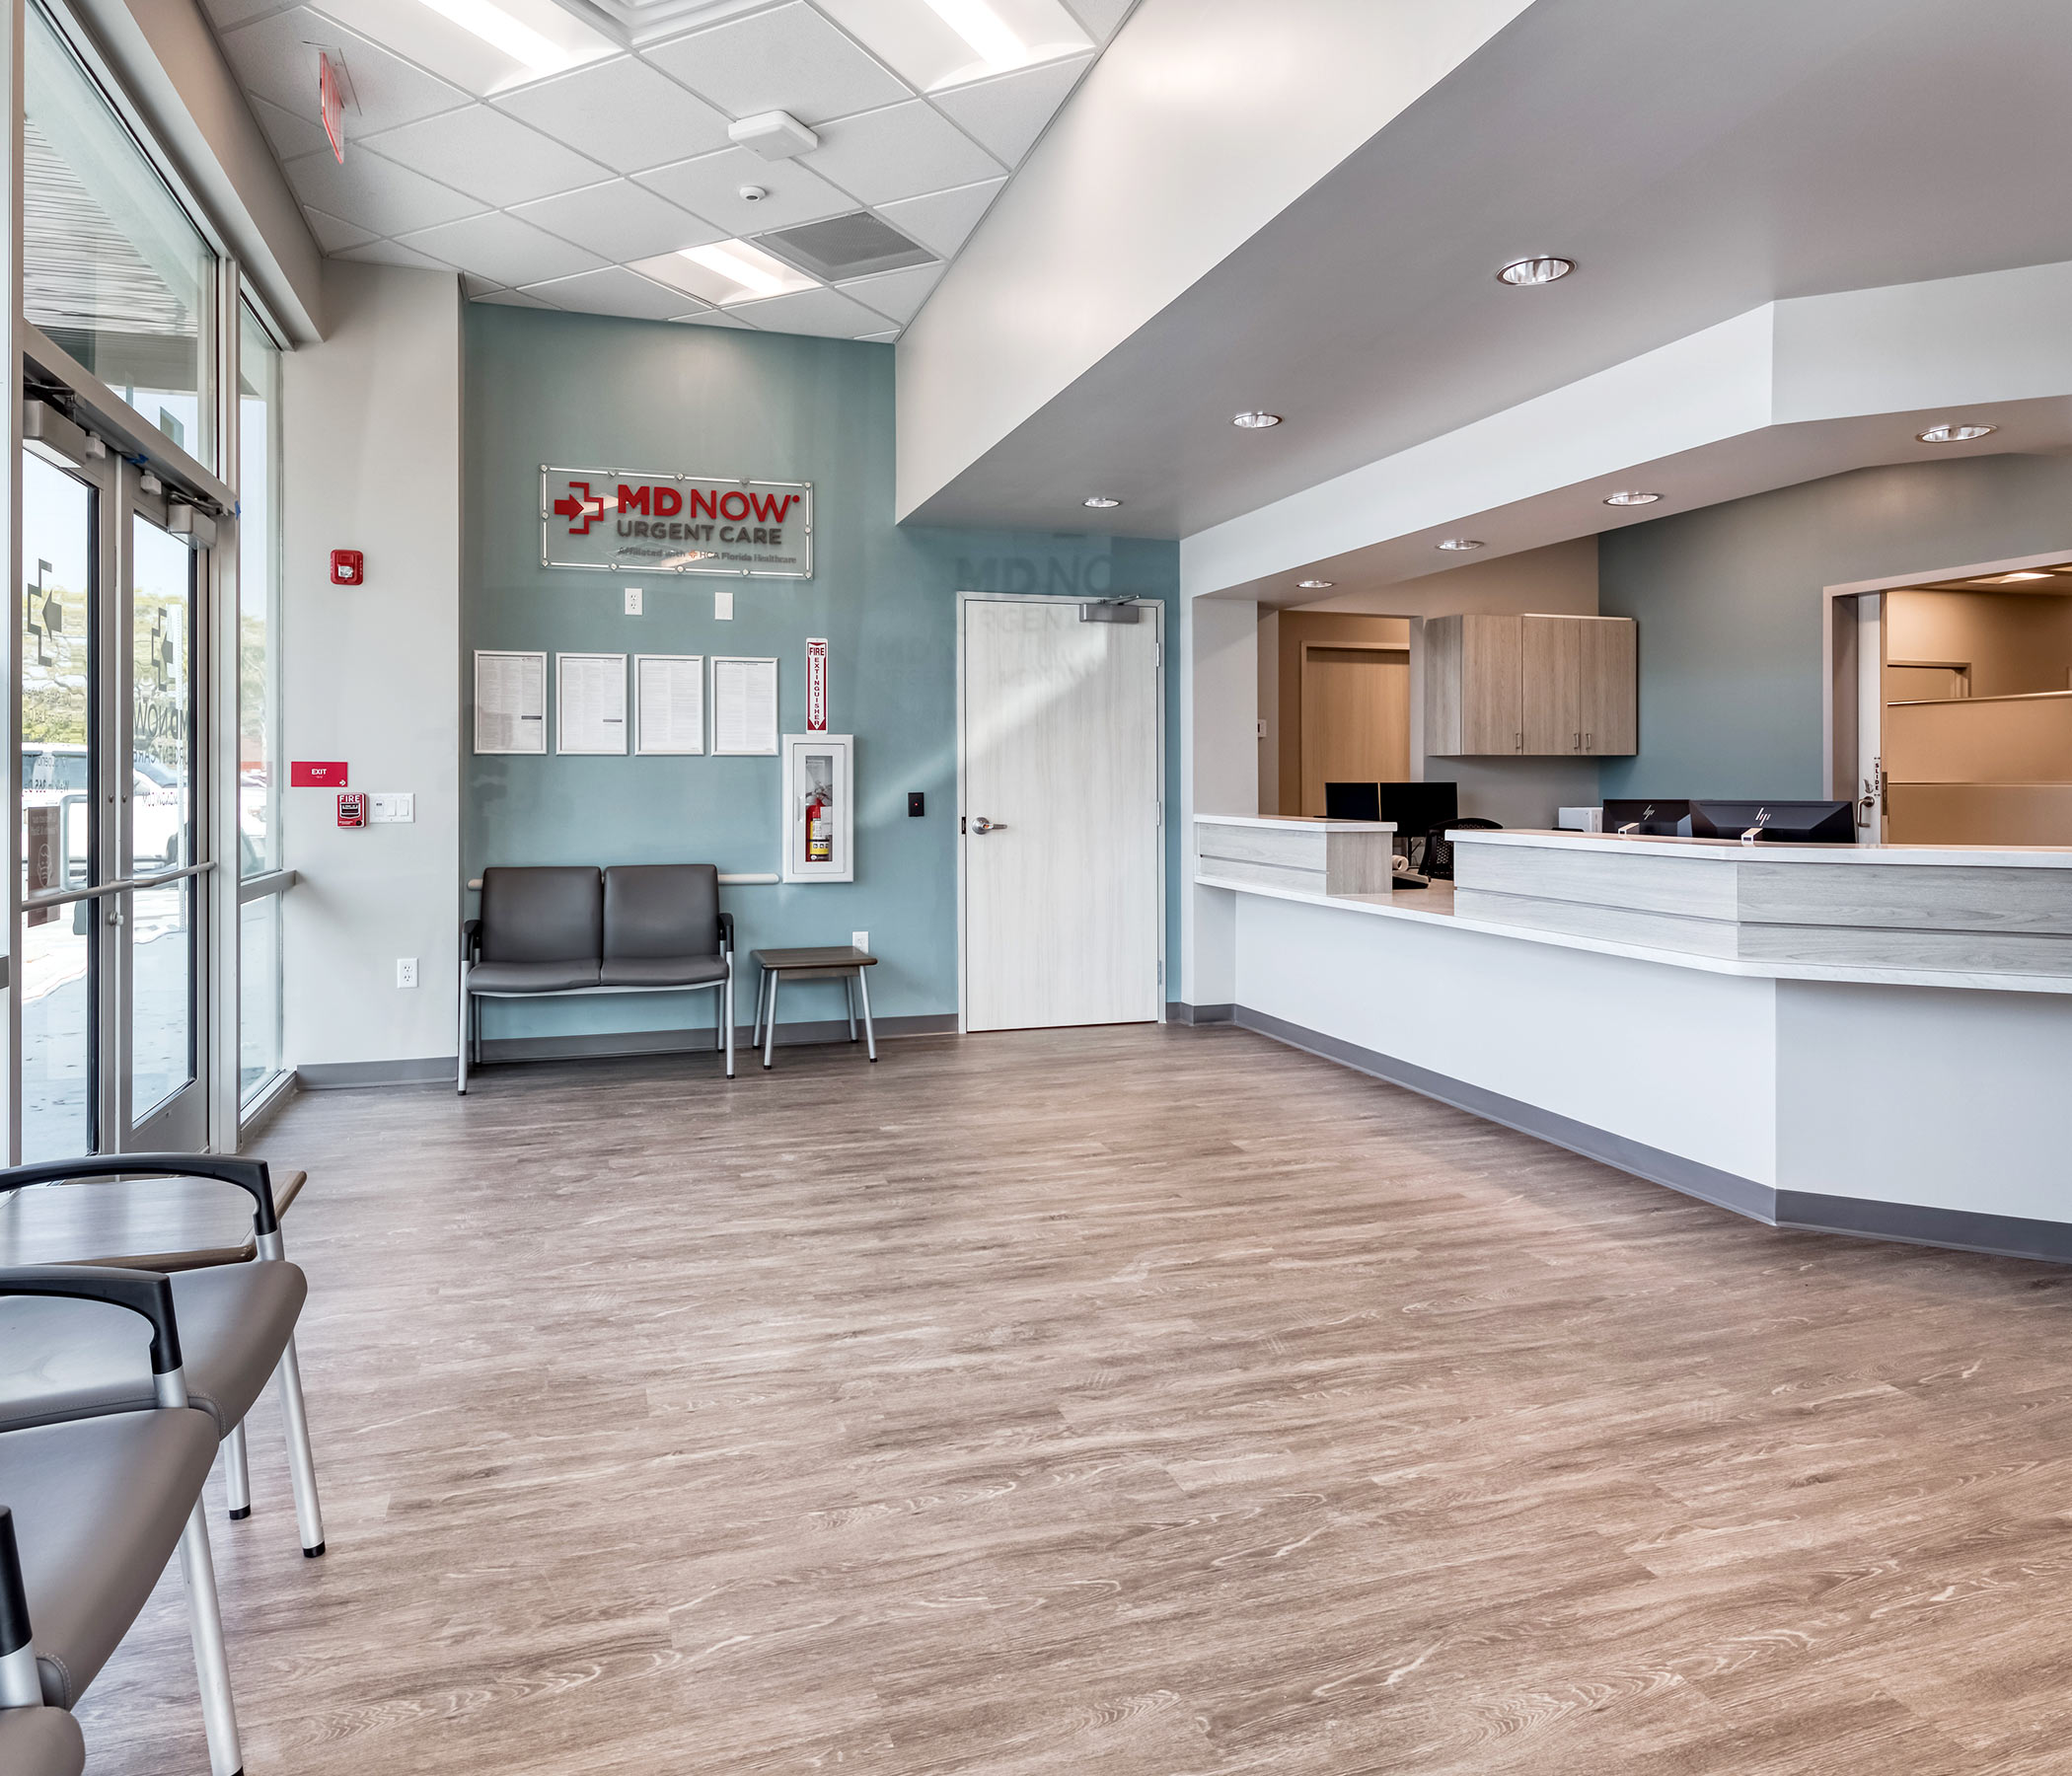 MD Now urgent care, No Appt. Necessary, walk ins welcome.